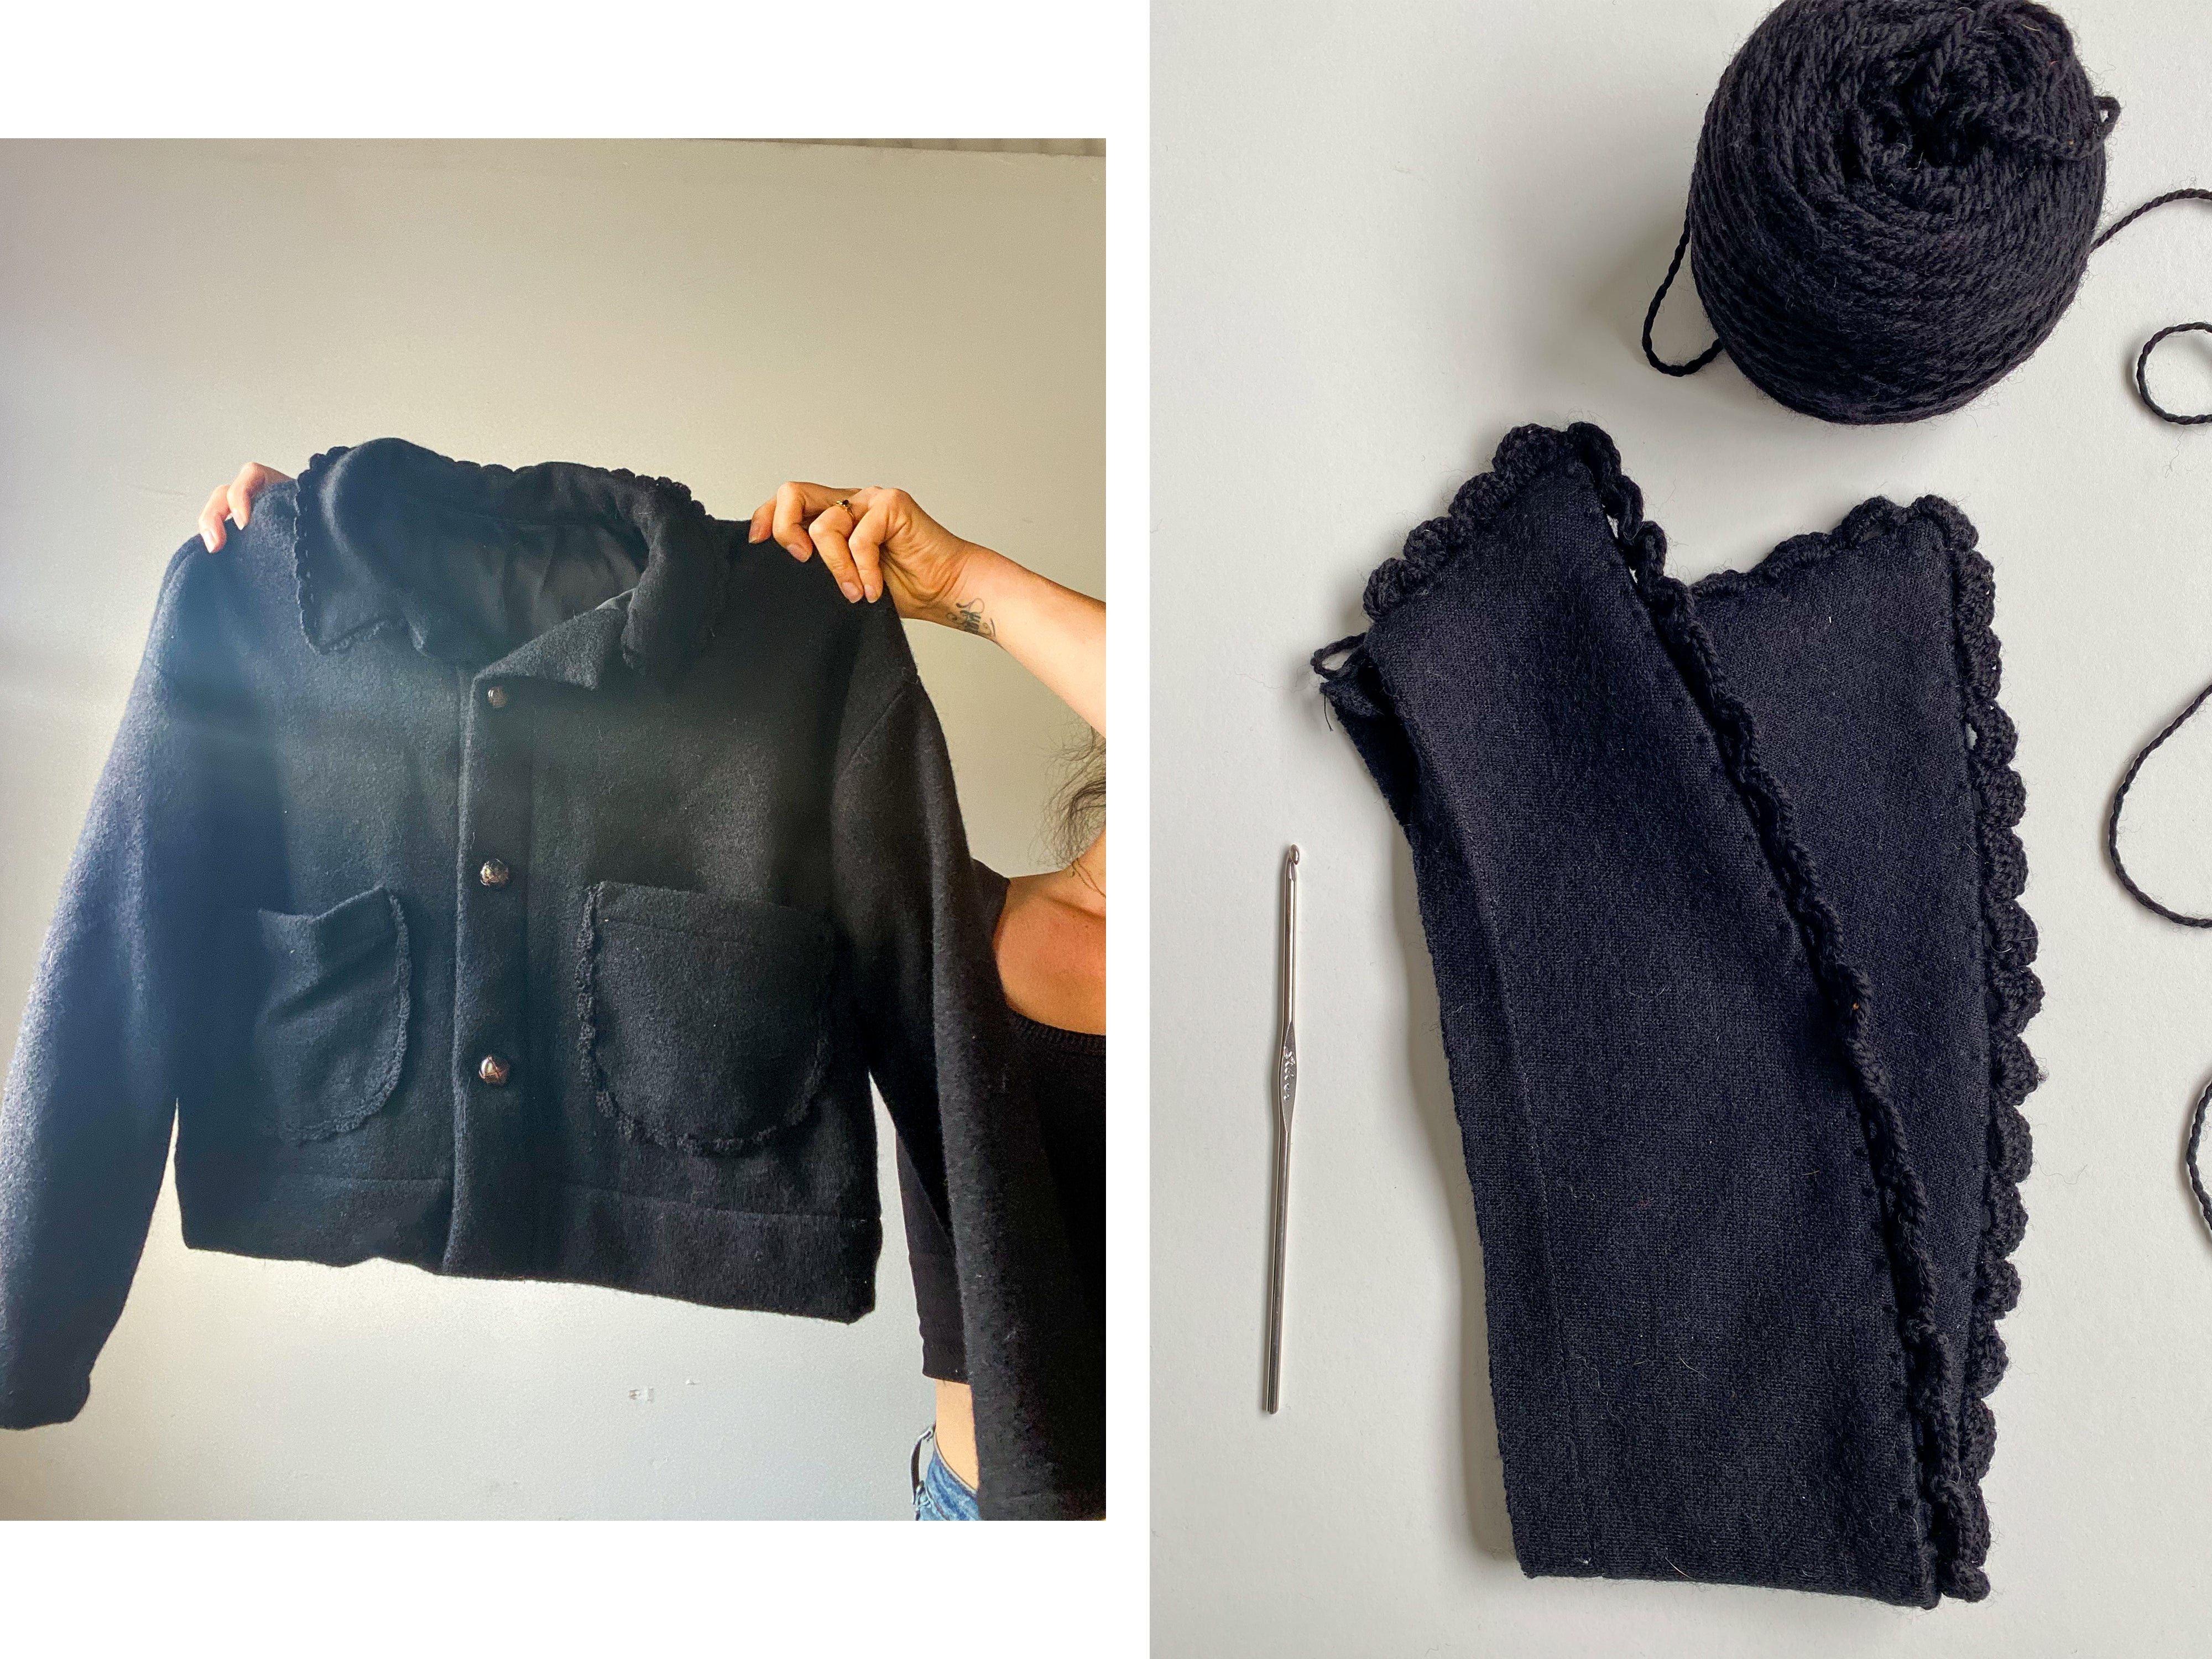 Ilford Jacket Fleece Vest Sewing Hack with Blanket Stitch